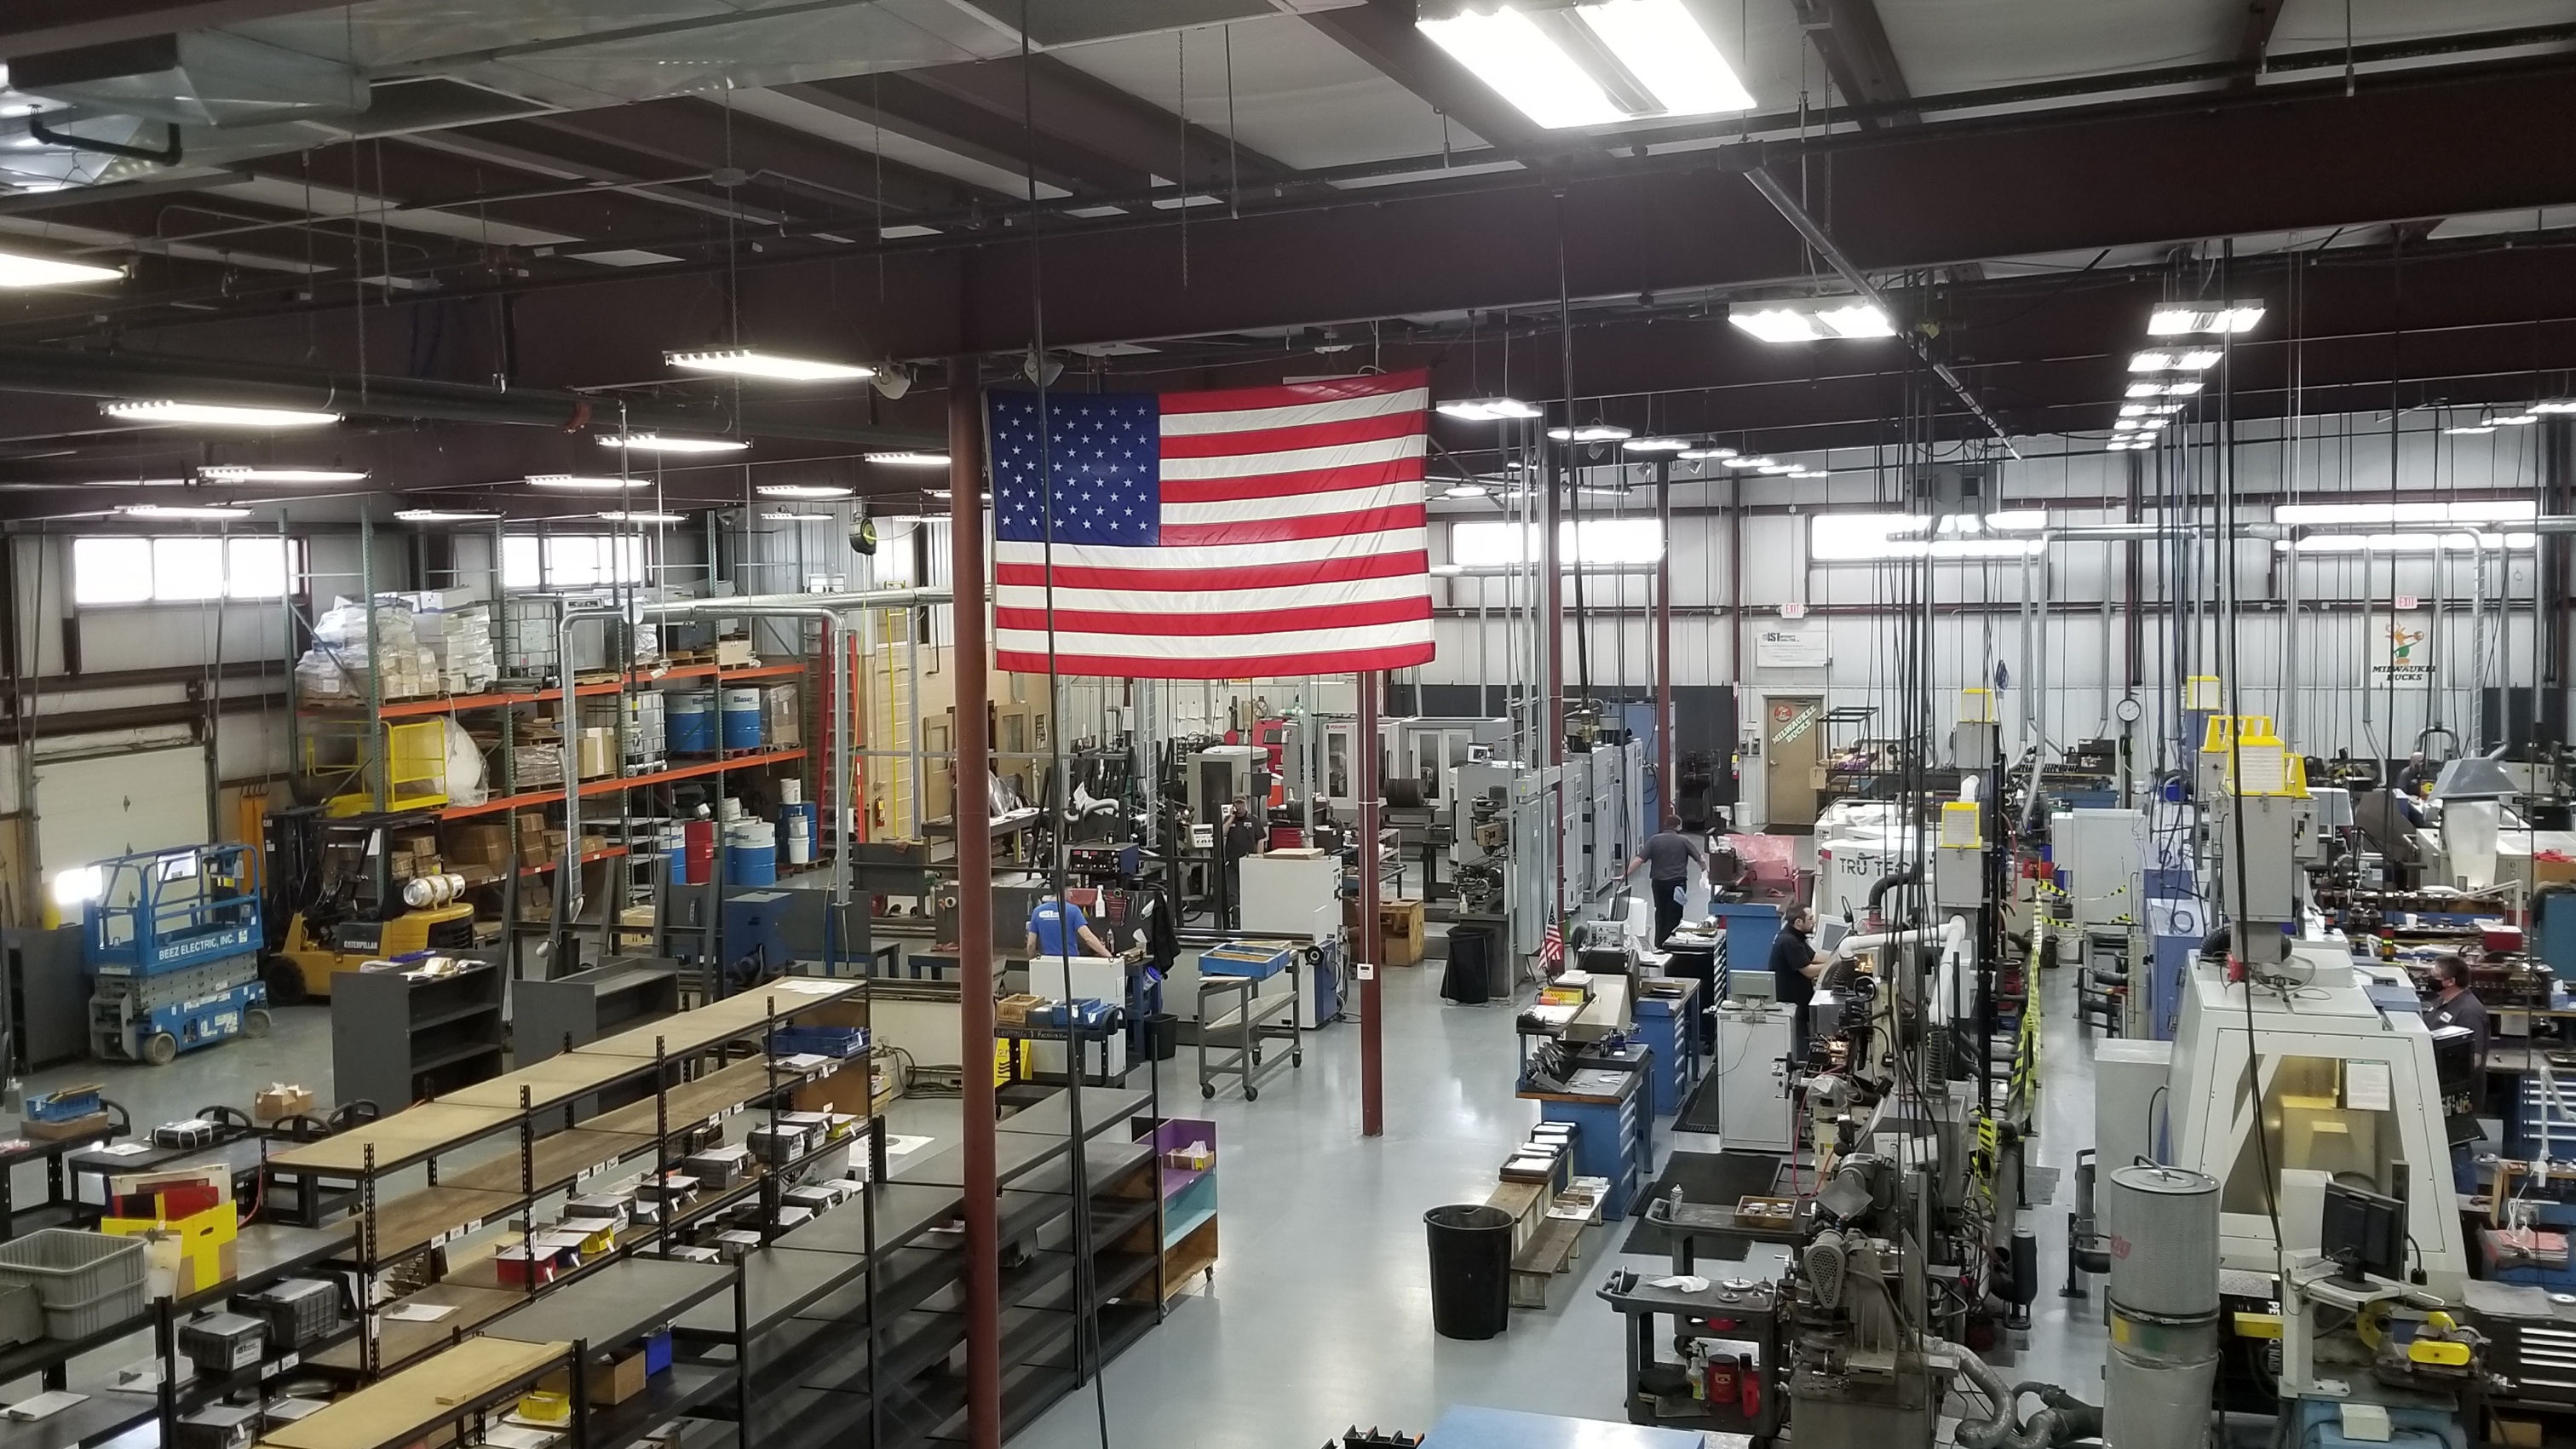 Integrity’s 13,000-square-foot factory in Fond du Lac, Wisconsin.